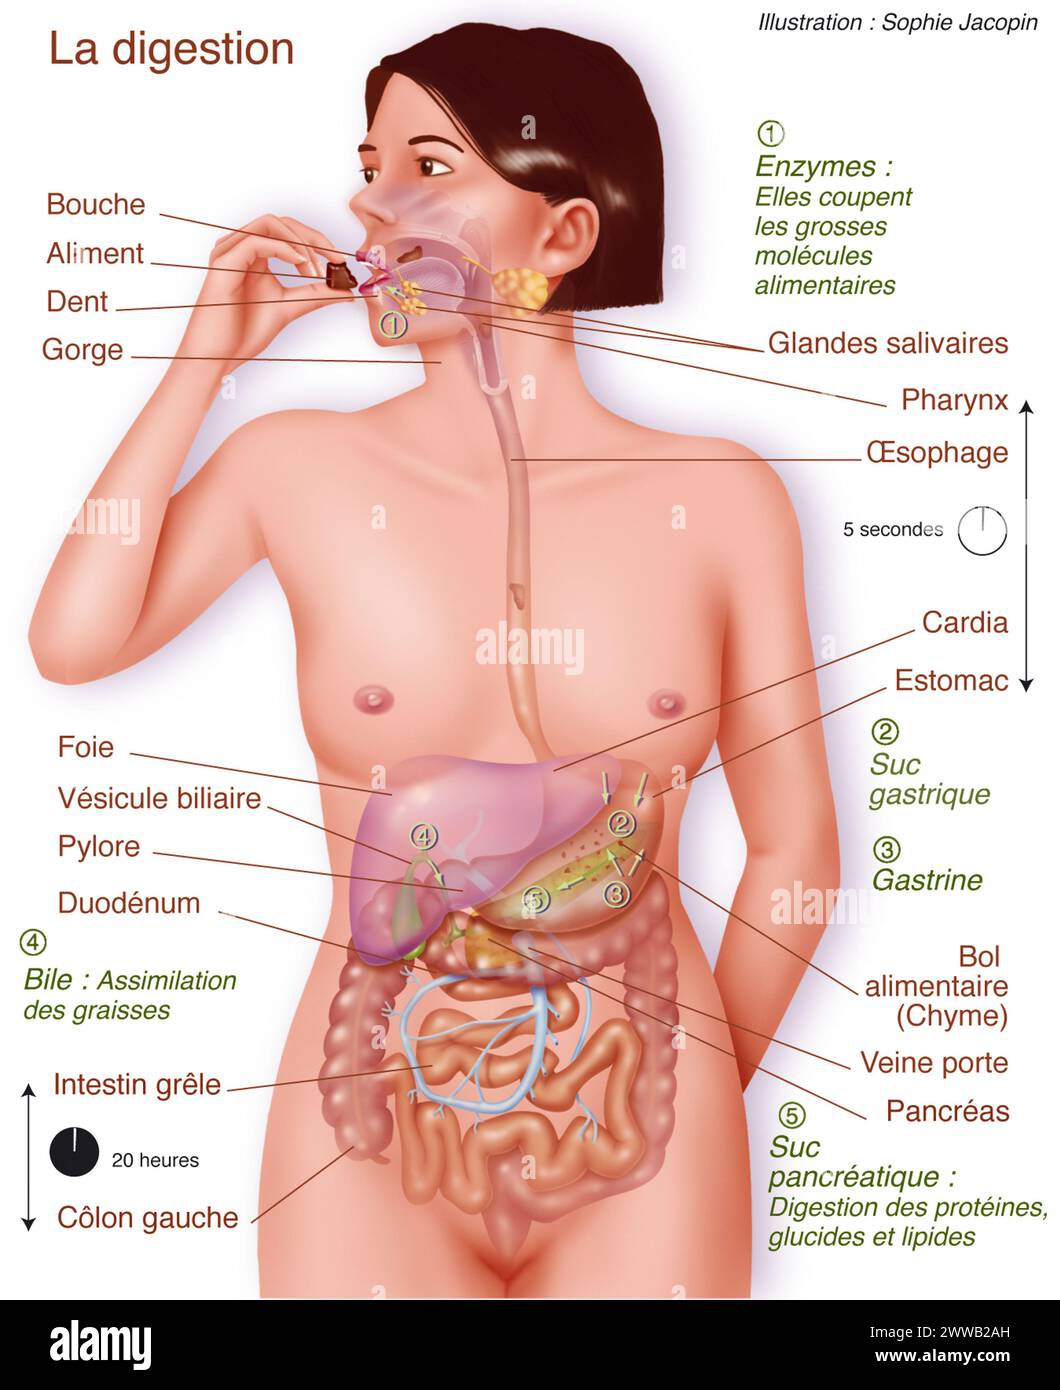 The digestion. Stock Photo